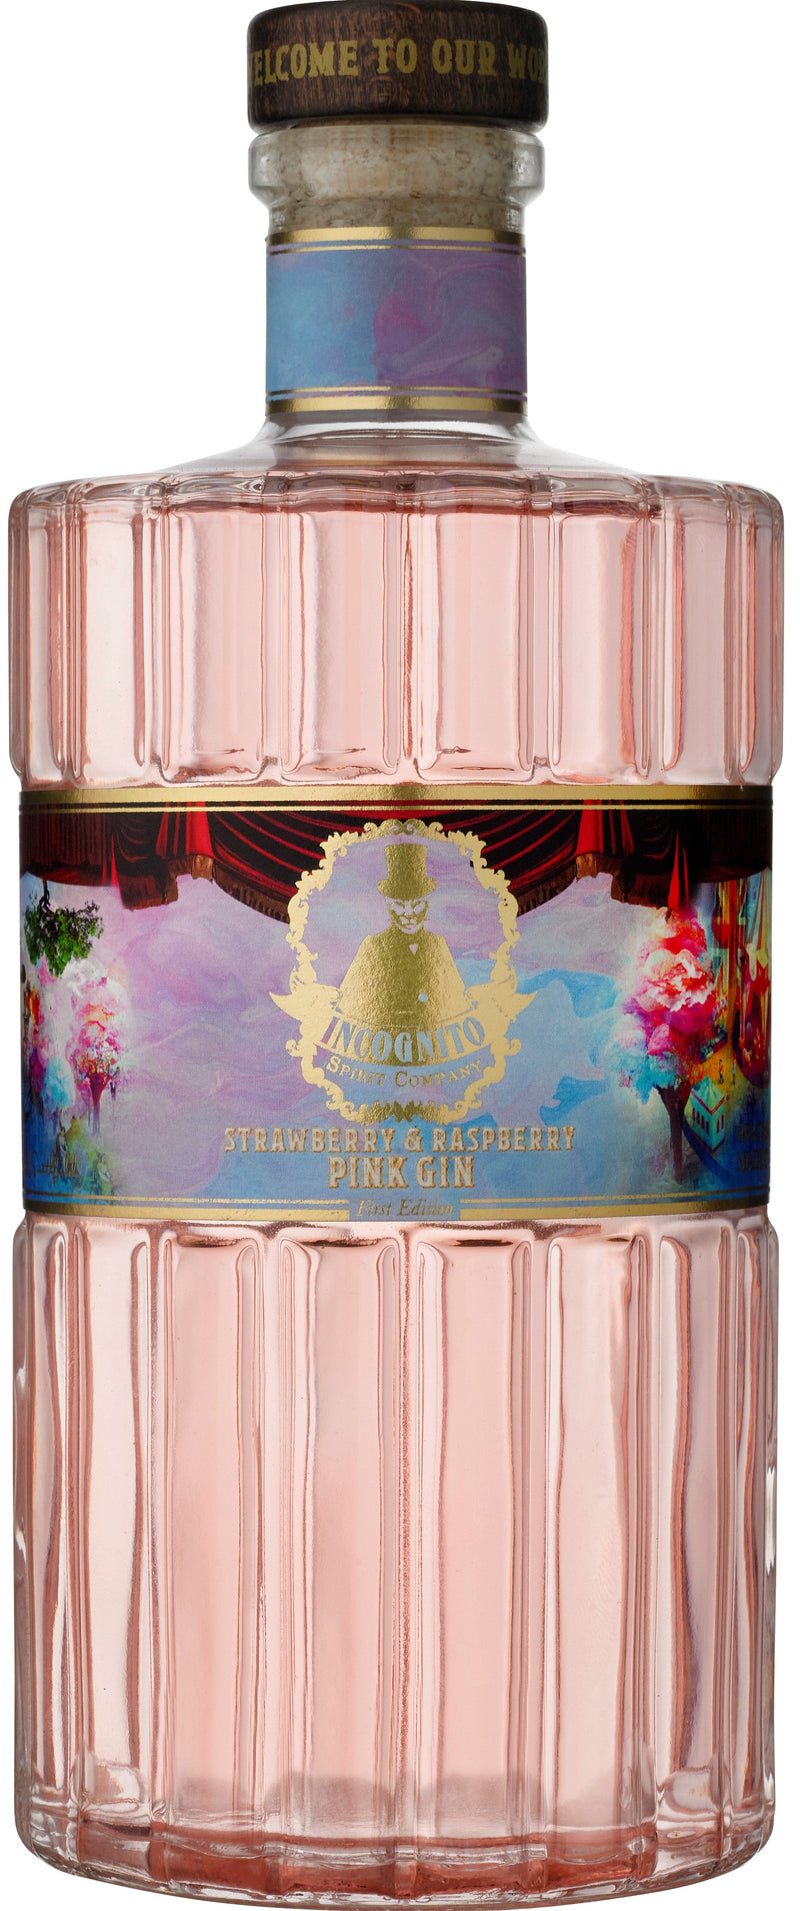 Incognito Strawberry & Raspberry Pink Gin 70cl